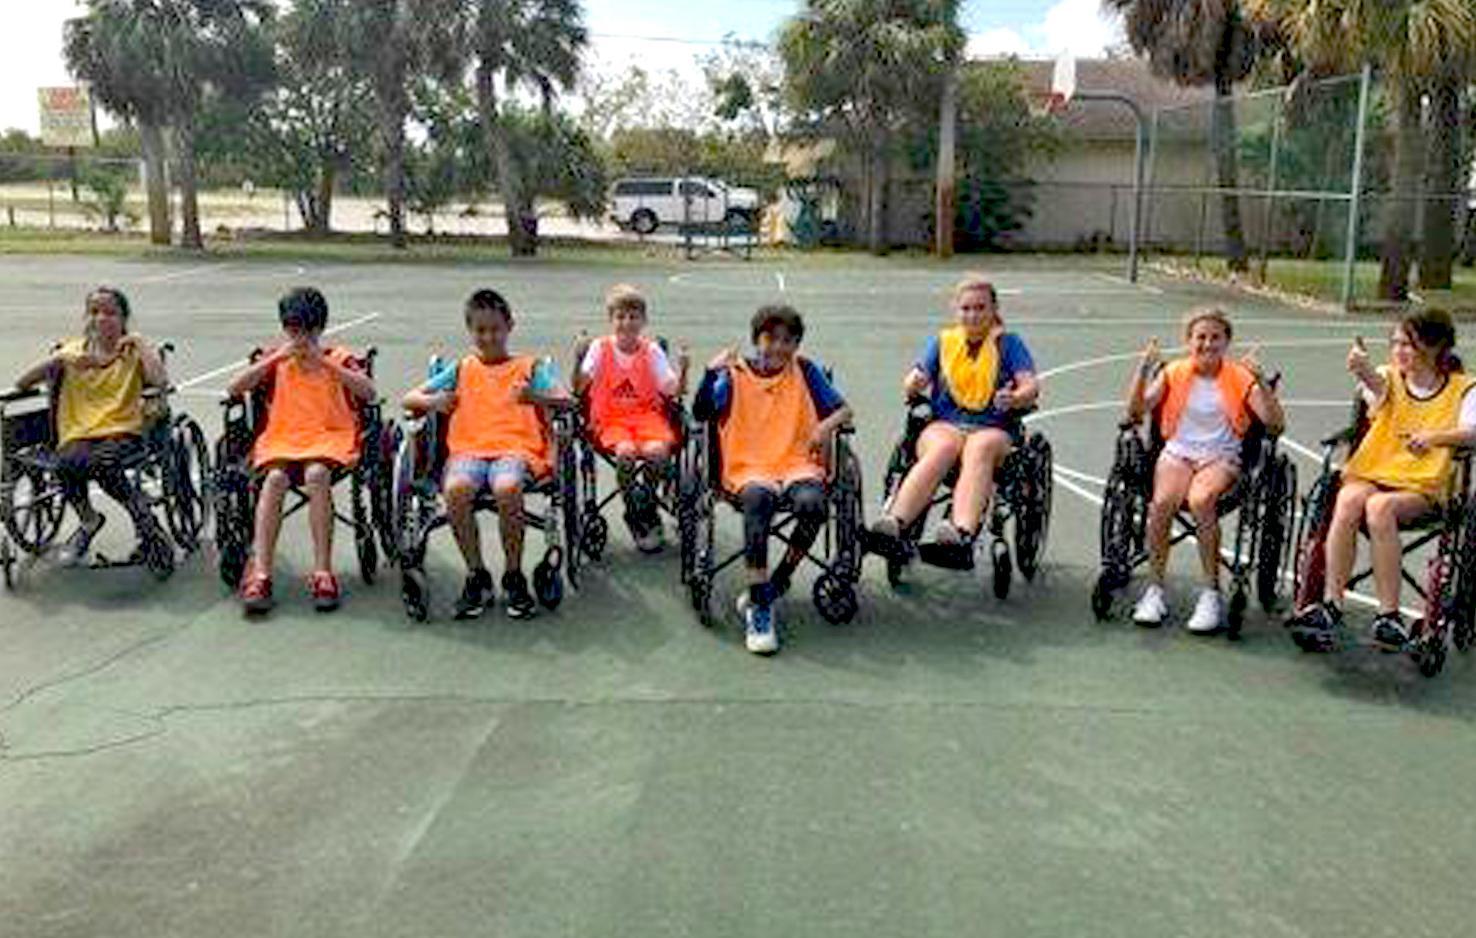 Teens posing for a photo after a wheelchair basketball game.